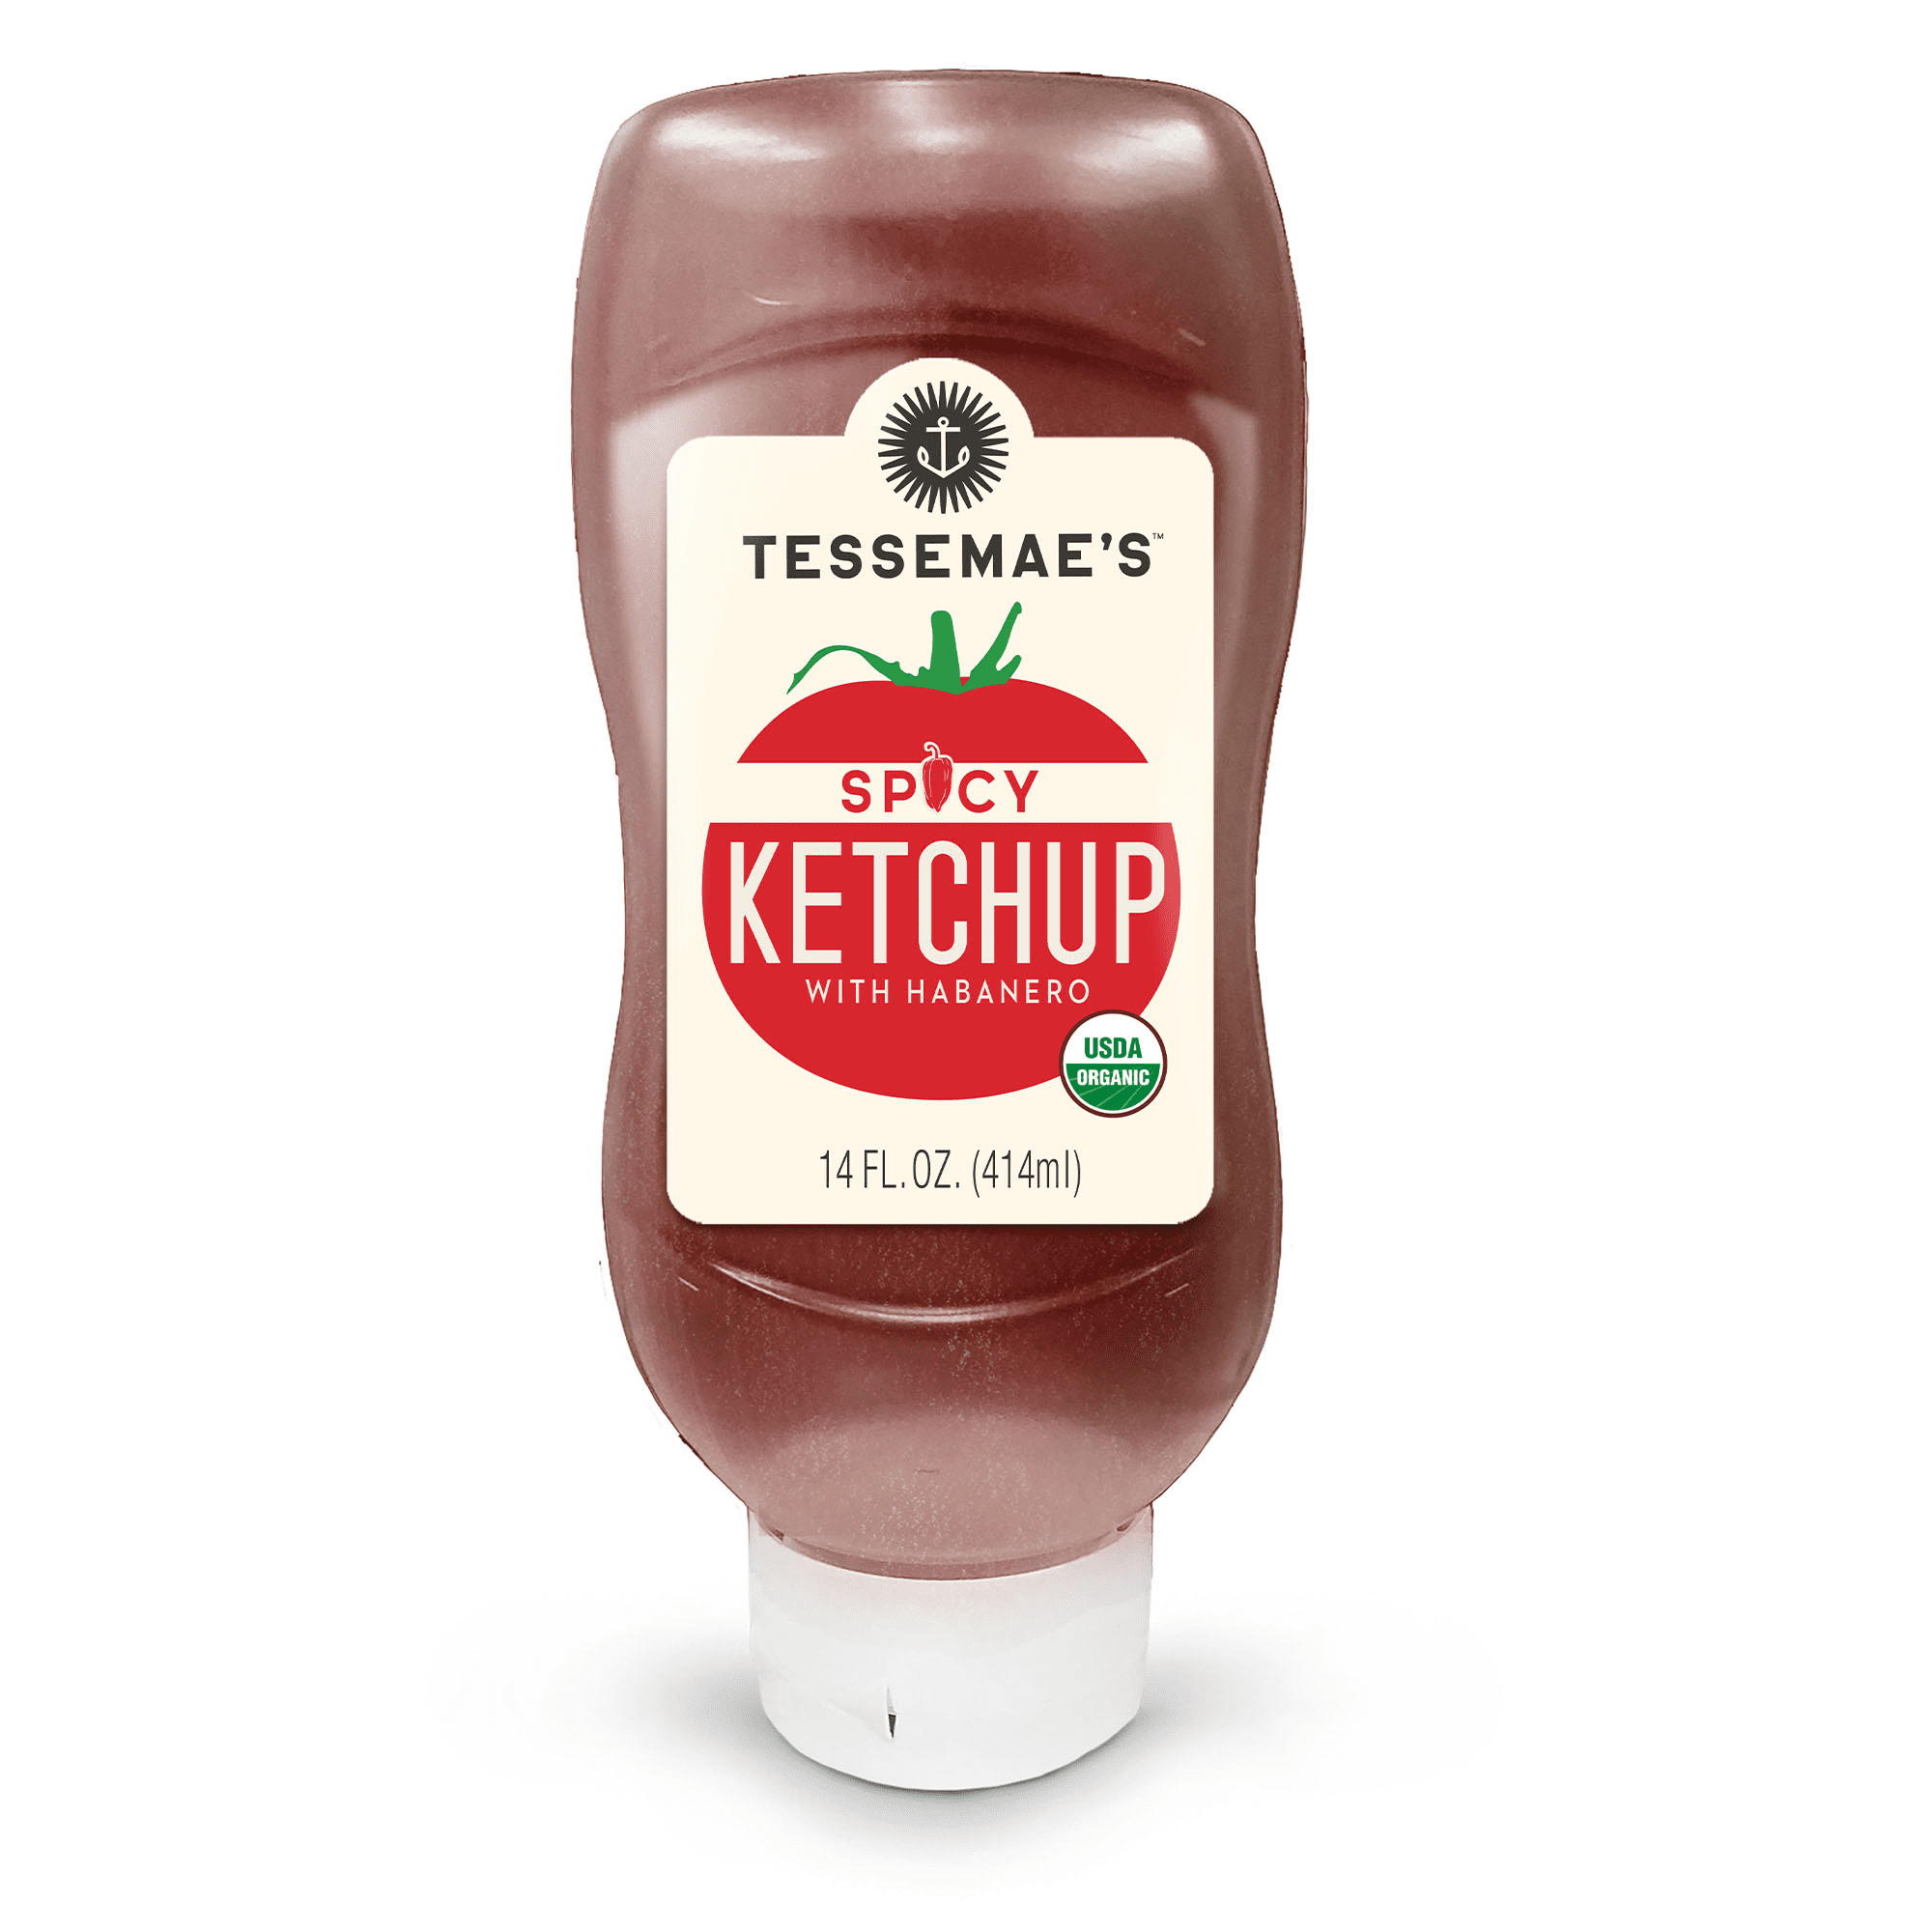 Tessemae's Pantry Spicy Ketchup Squeeze Bottle 6 units per case 14.0 oz